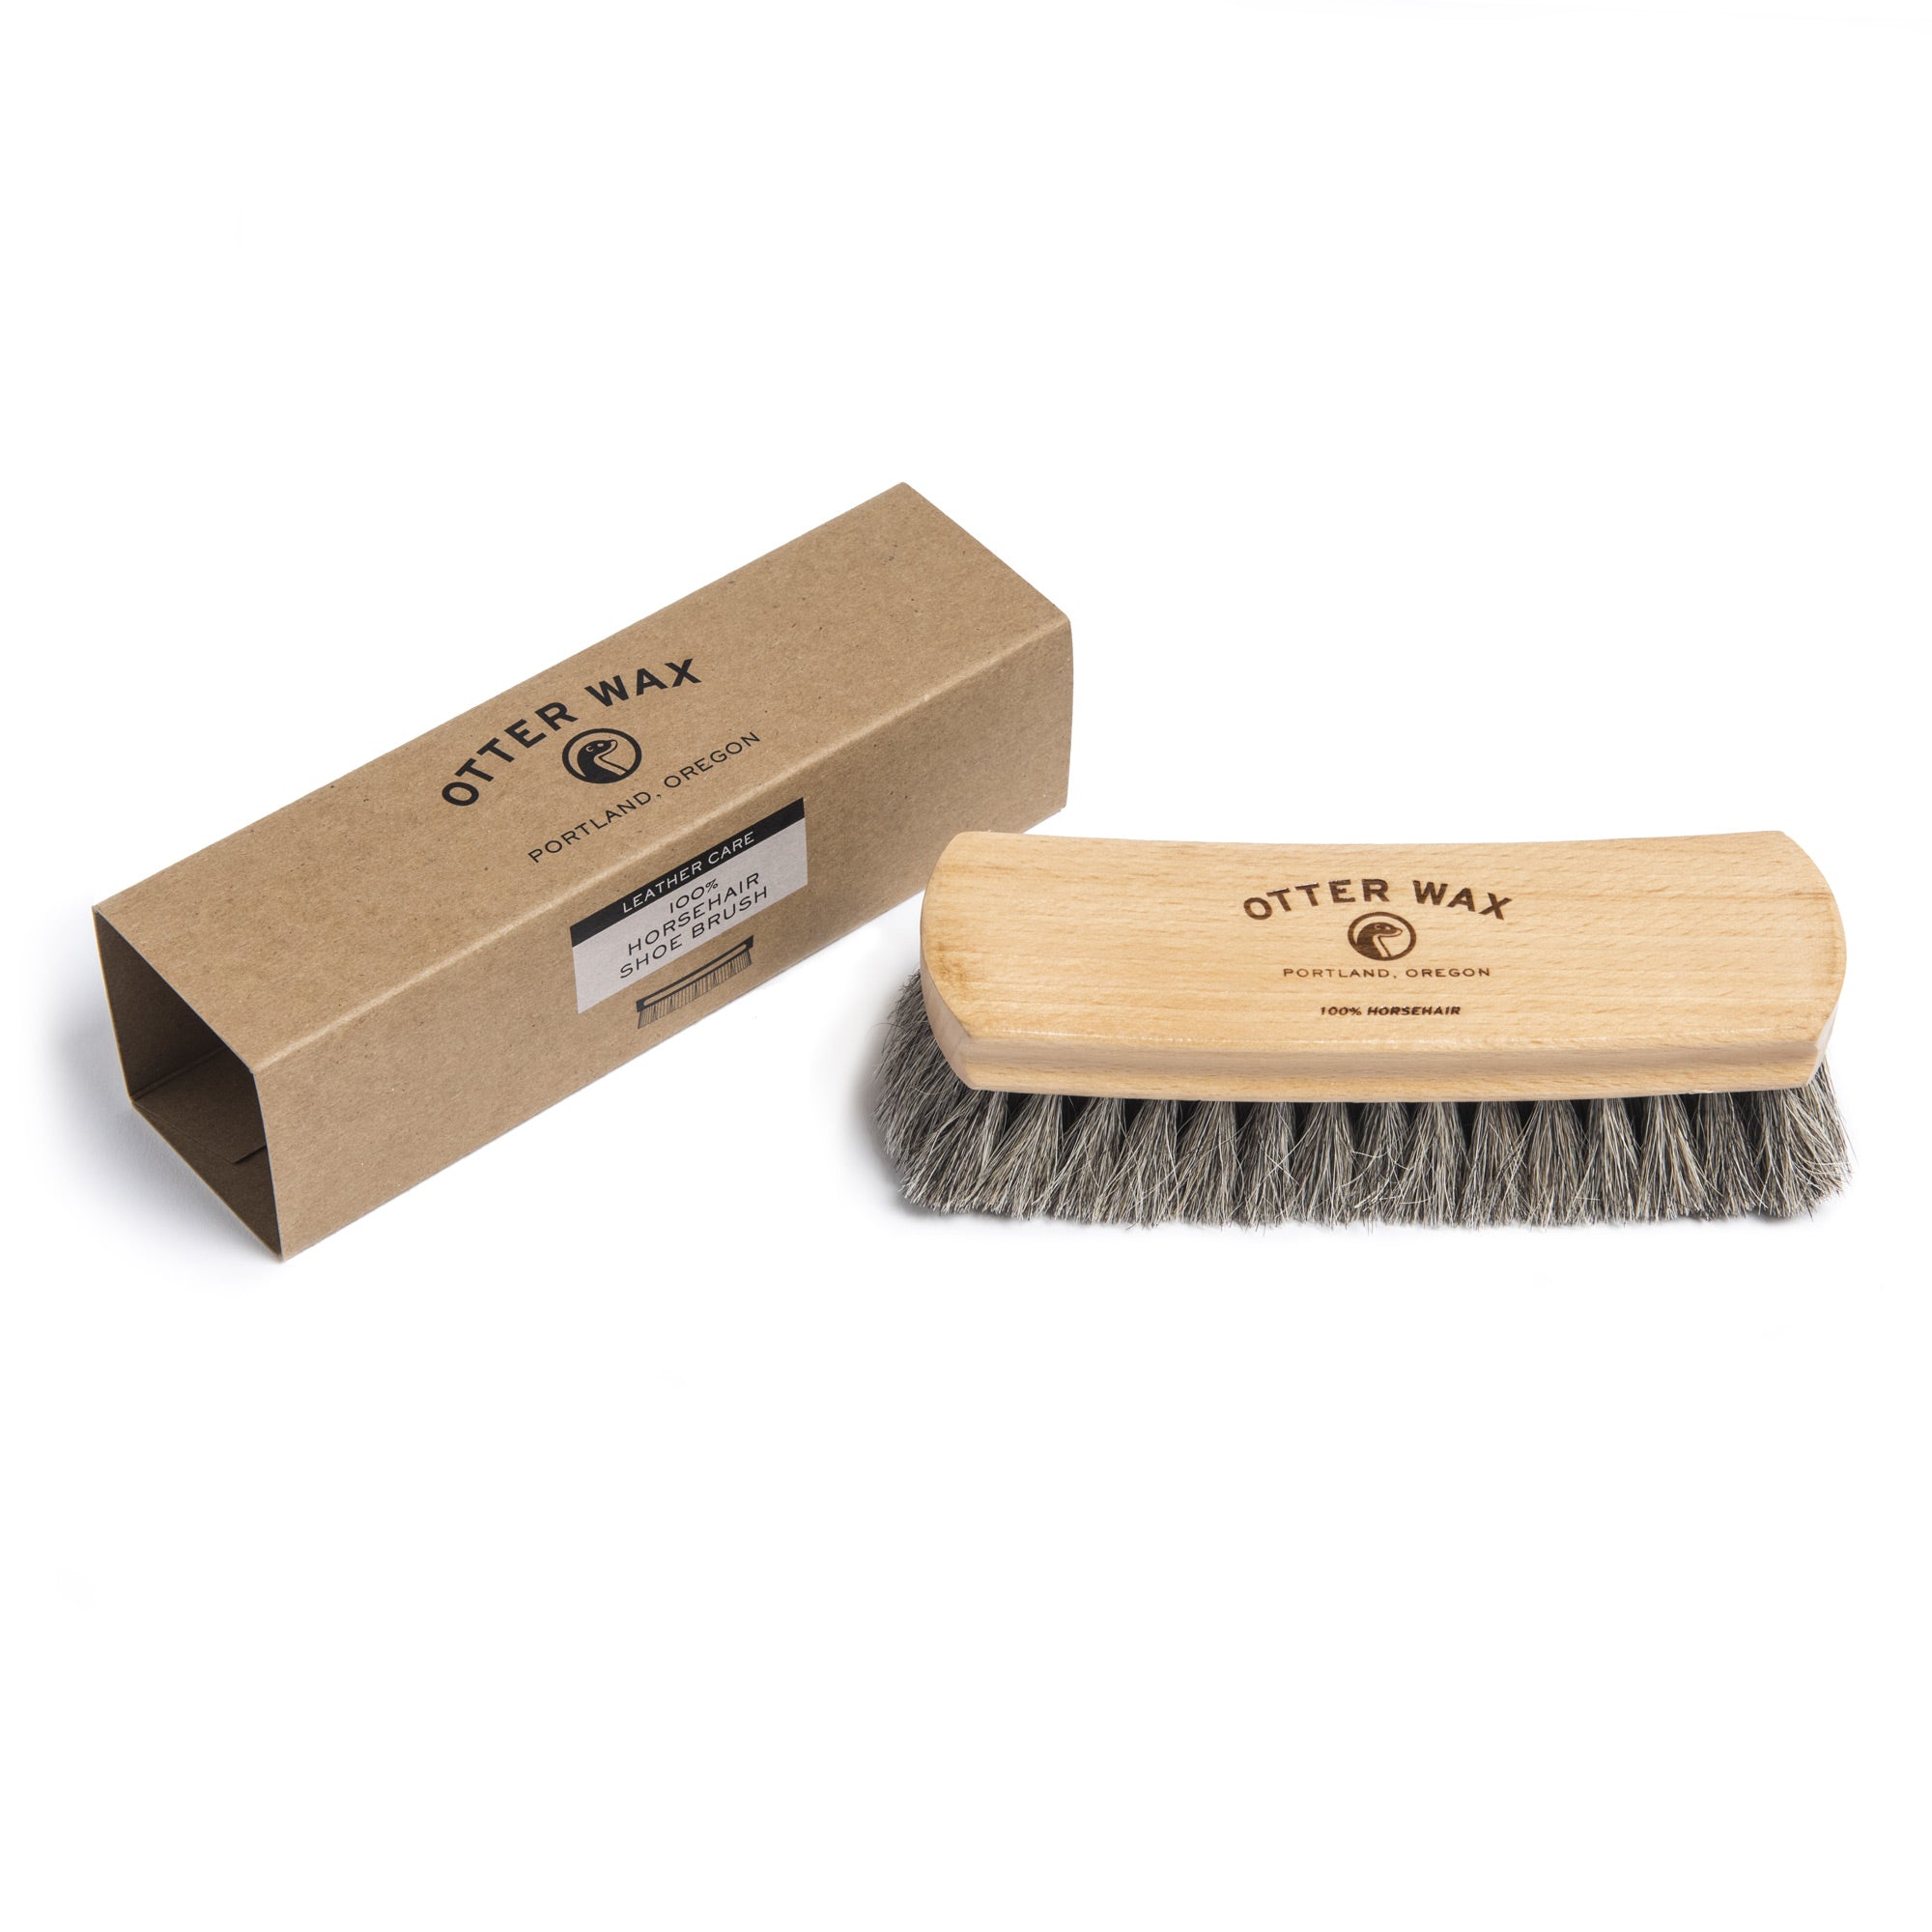 Otter Wax Deluxe Horsehair Hand Brush Soft Bristles For Buffing Leather Shoes Boots And Furniture